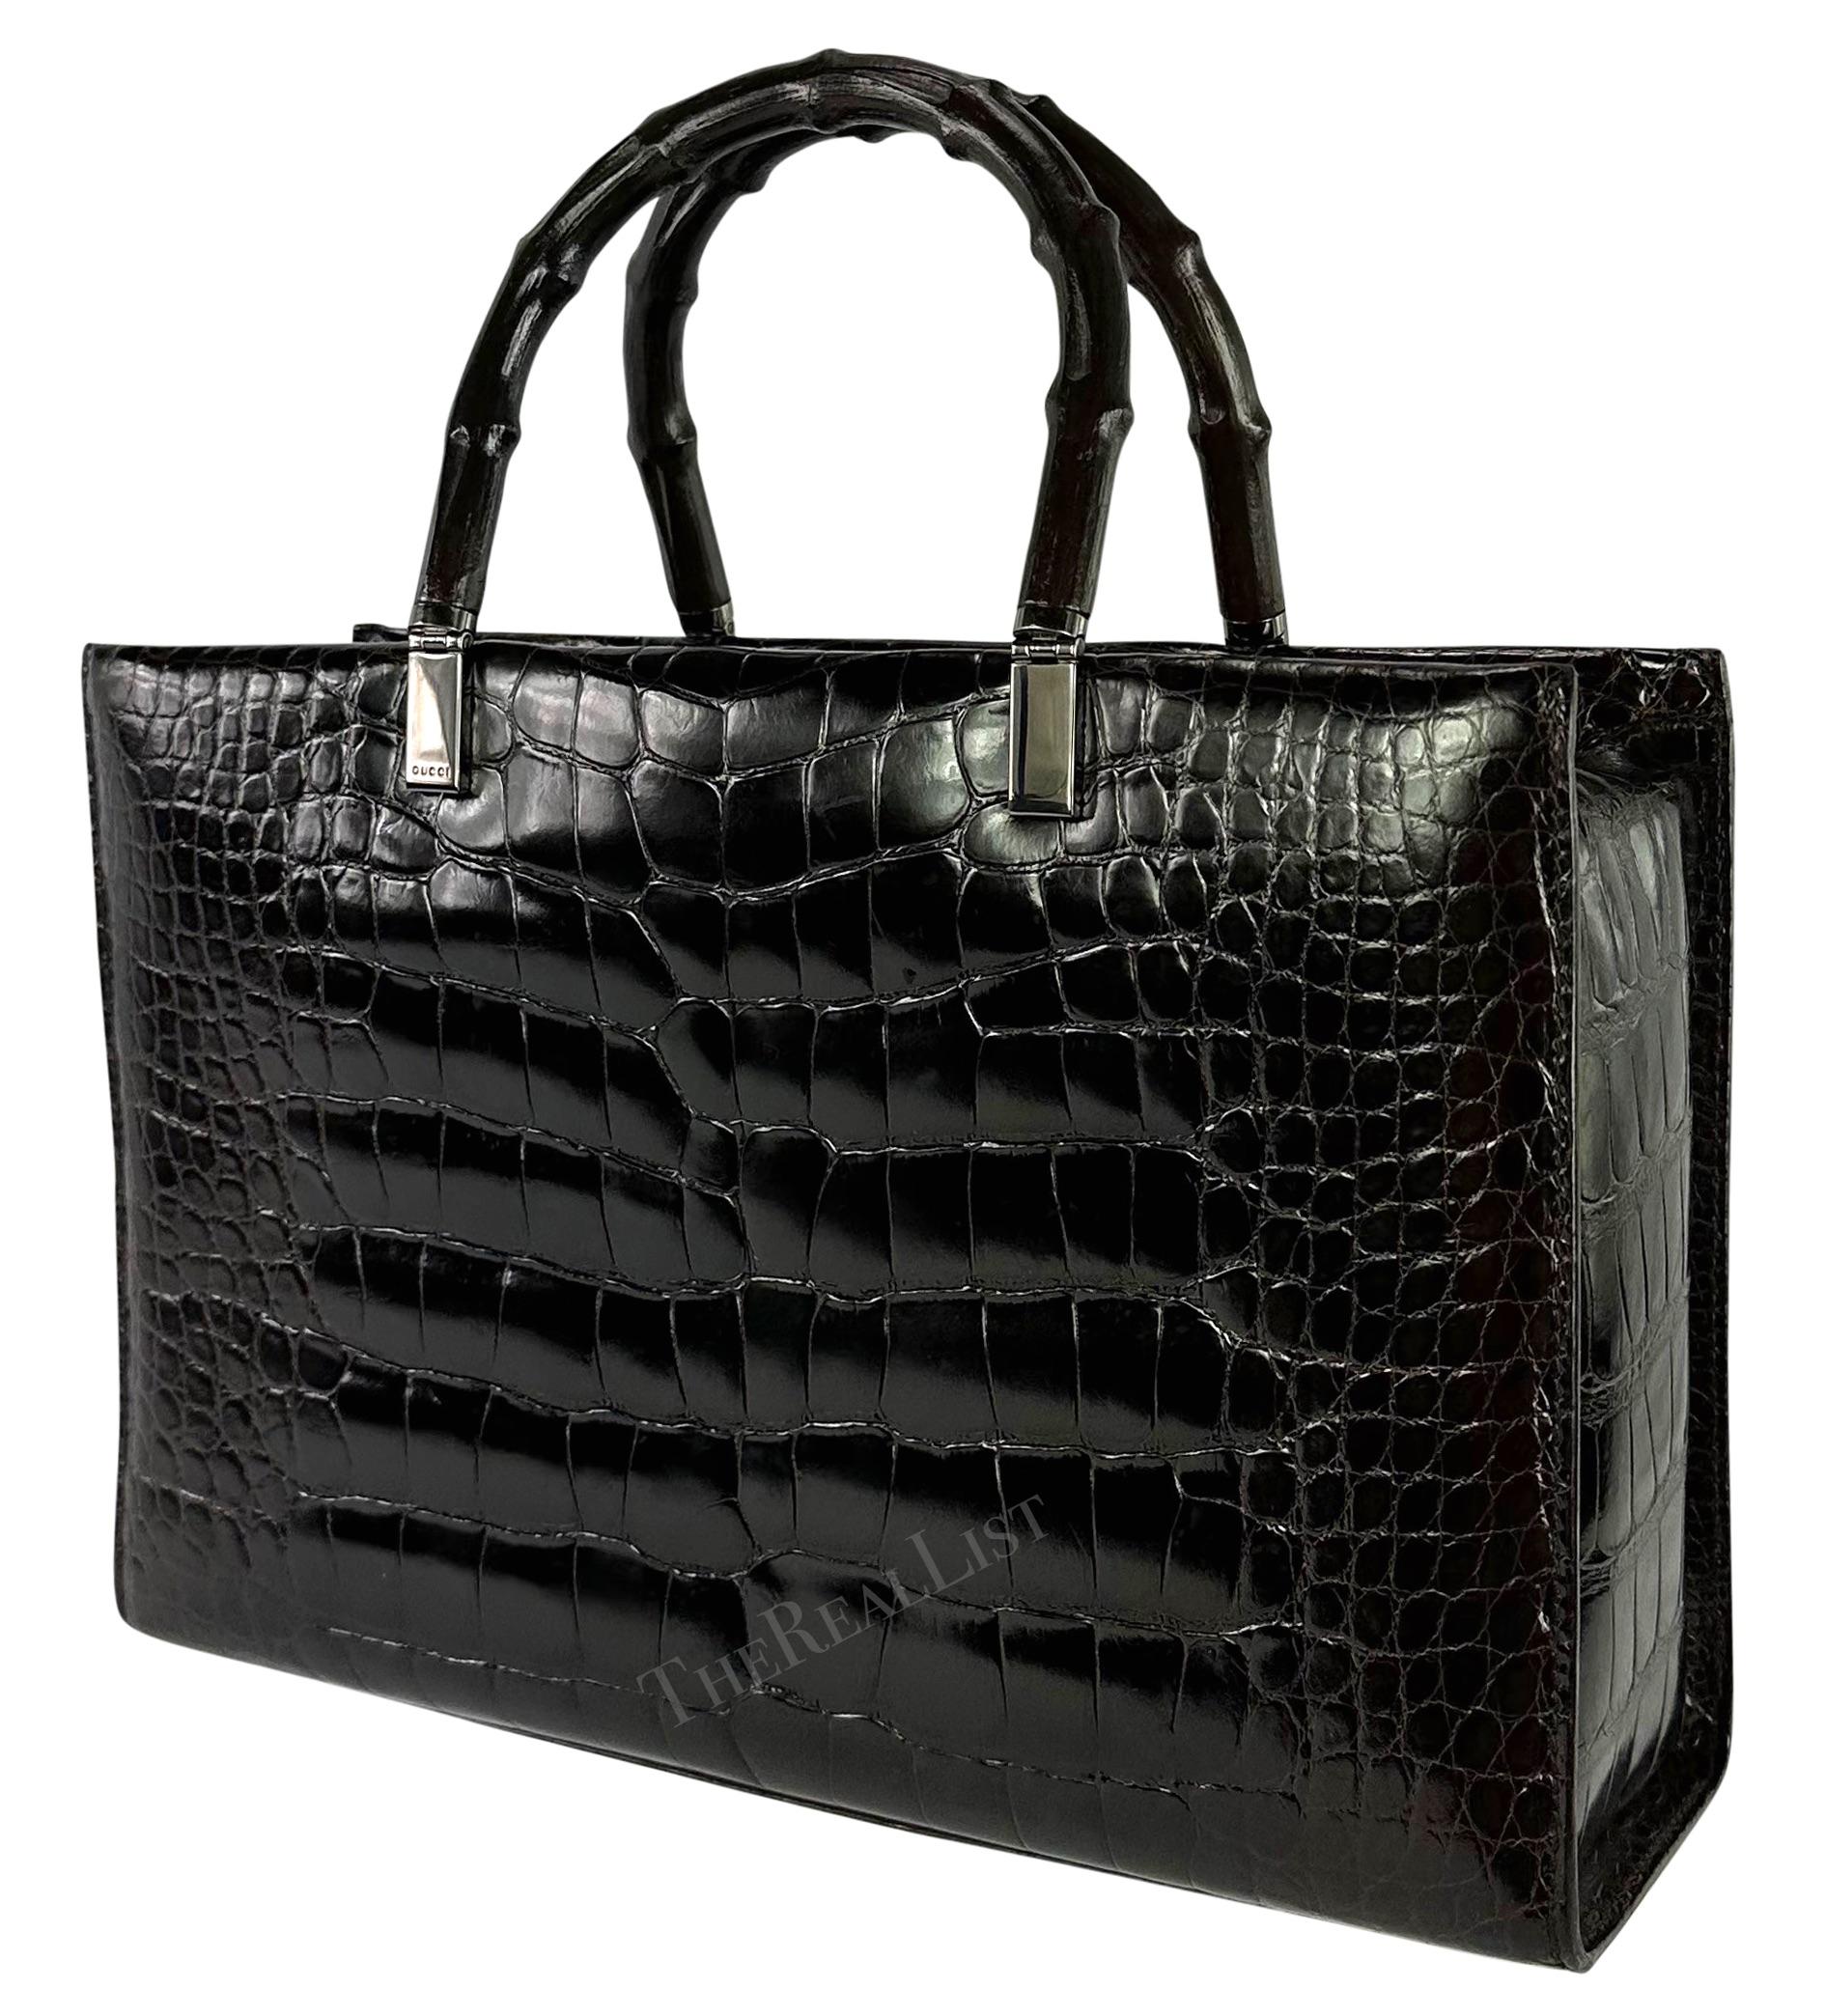 F/W 1998 Gucci by Tom Ford Ad Campaign Black Crocodile Bamboo Tote Bag  In Excellent Condition For Sale In West Hollywood, CA